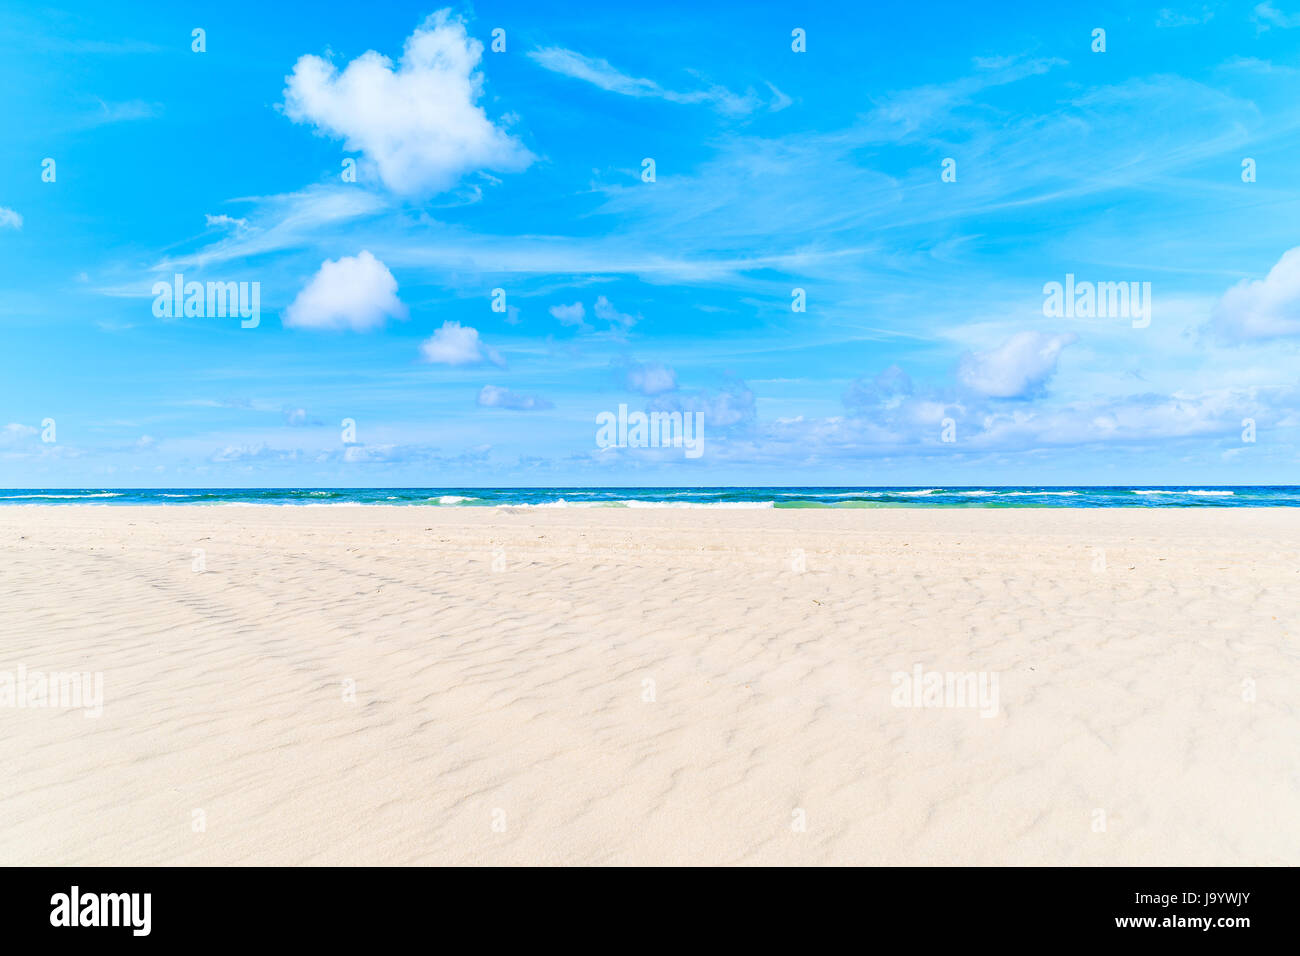 View of sandy beach and sea in Kampen village, Sylt island, North Sea, Germany Stock Photo